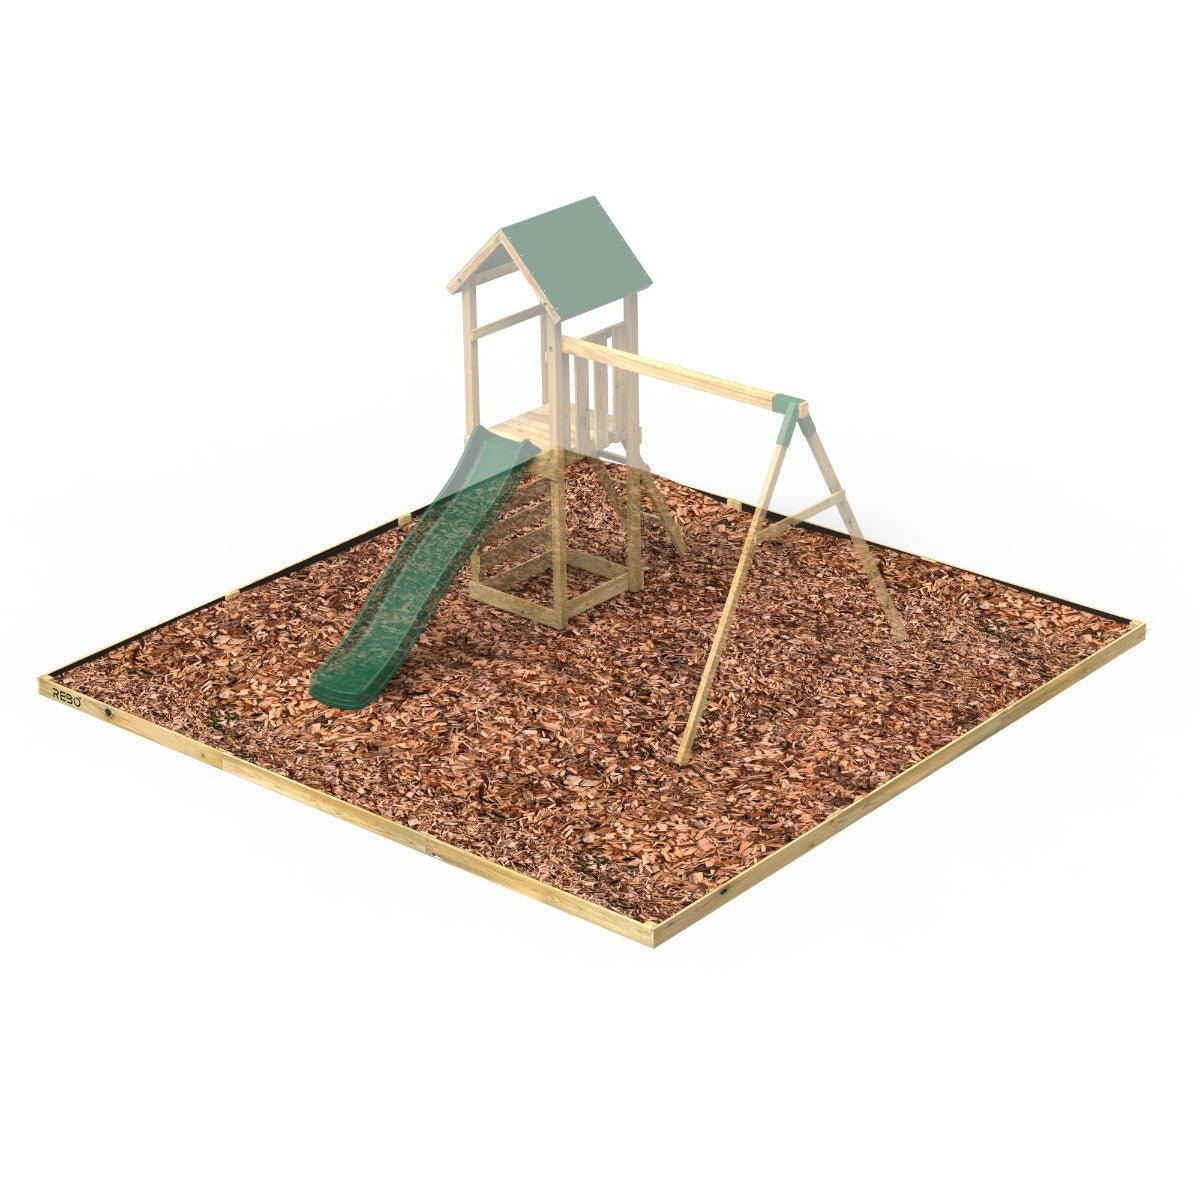 Rebo Safety Play Area Protective Bark Wood Chip Kit - 5.7M x 5.1M